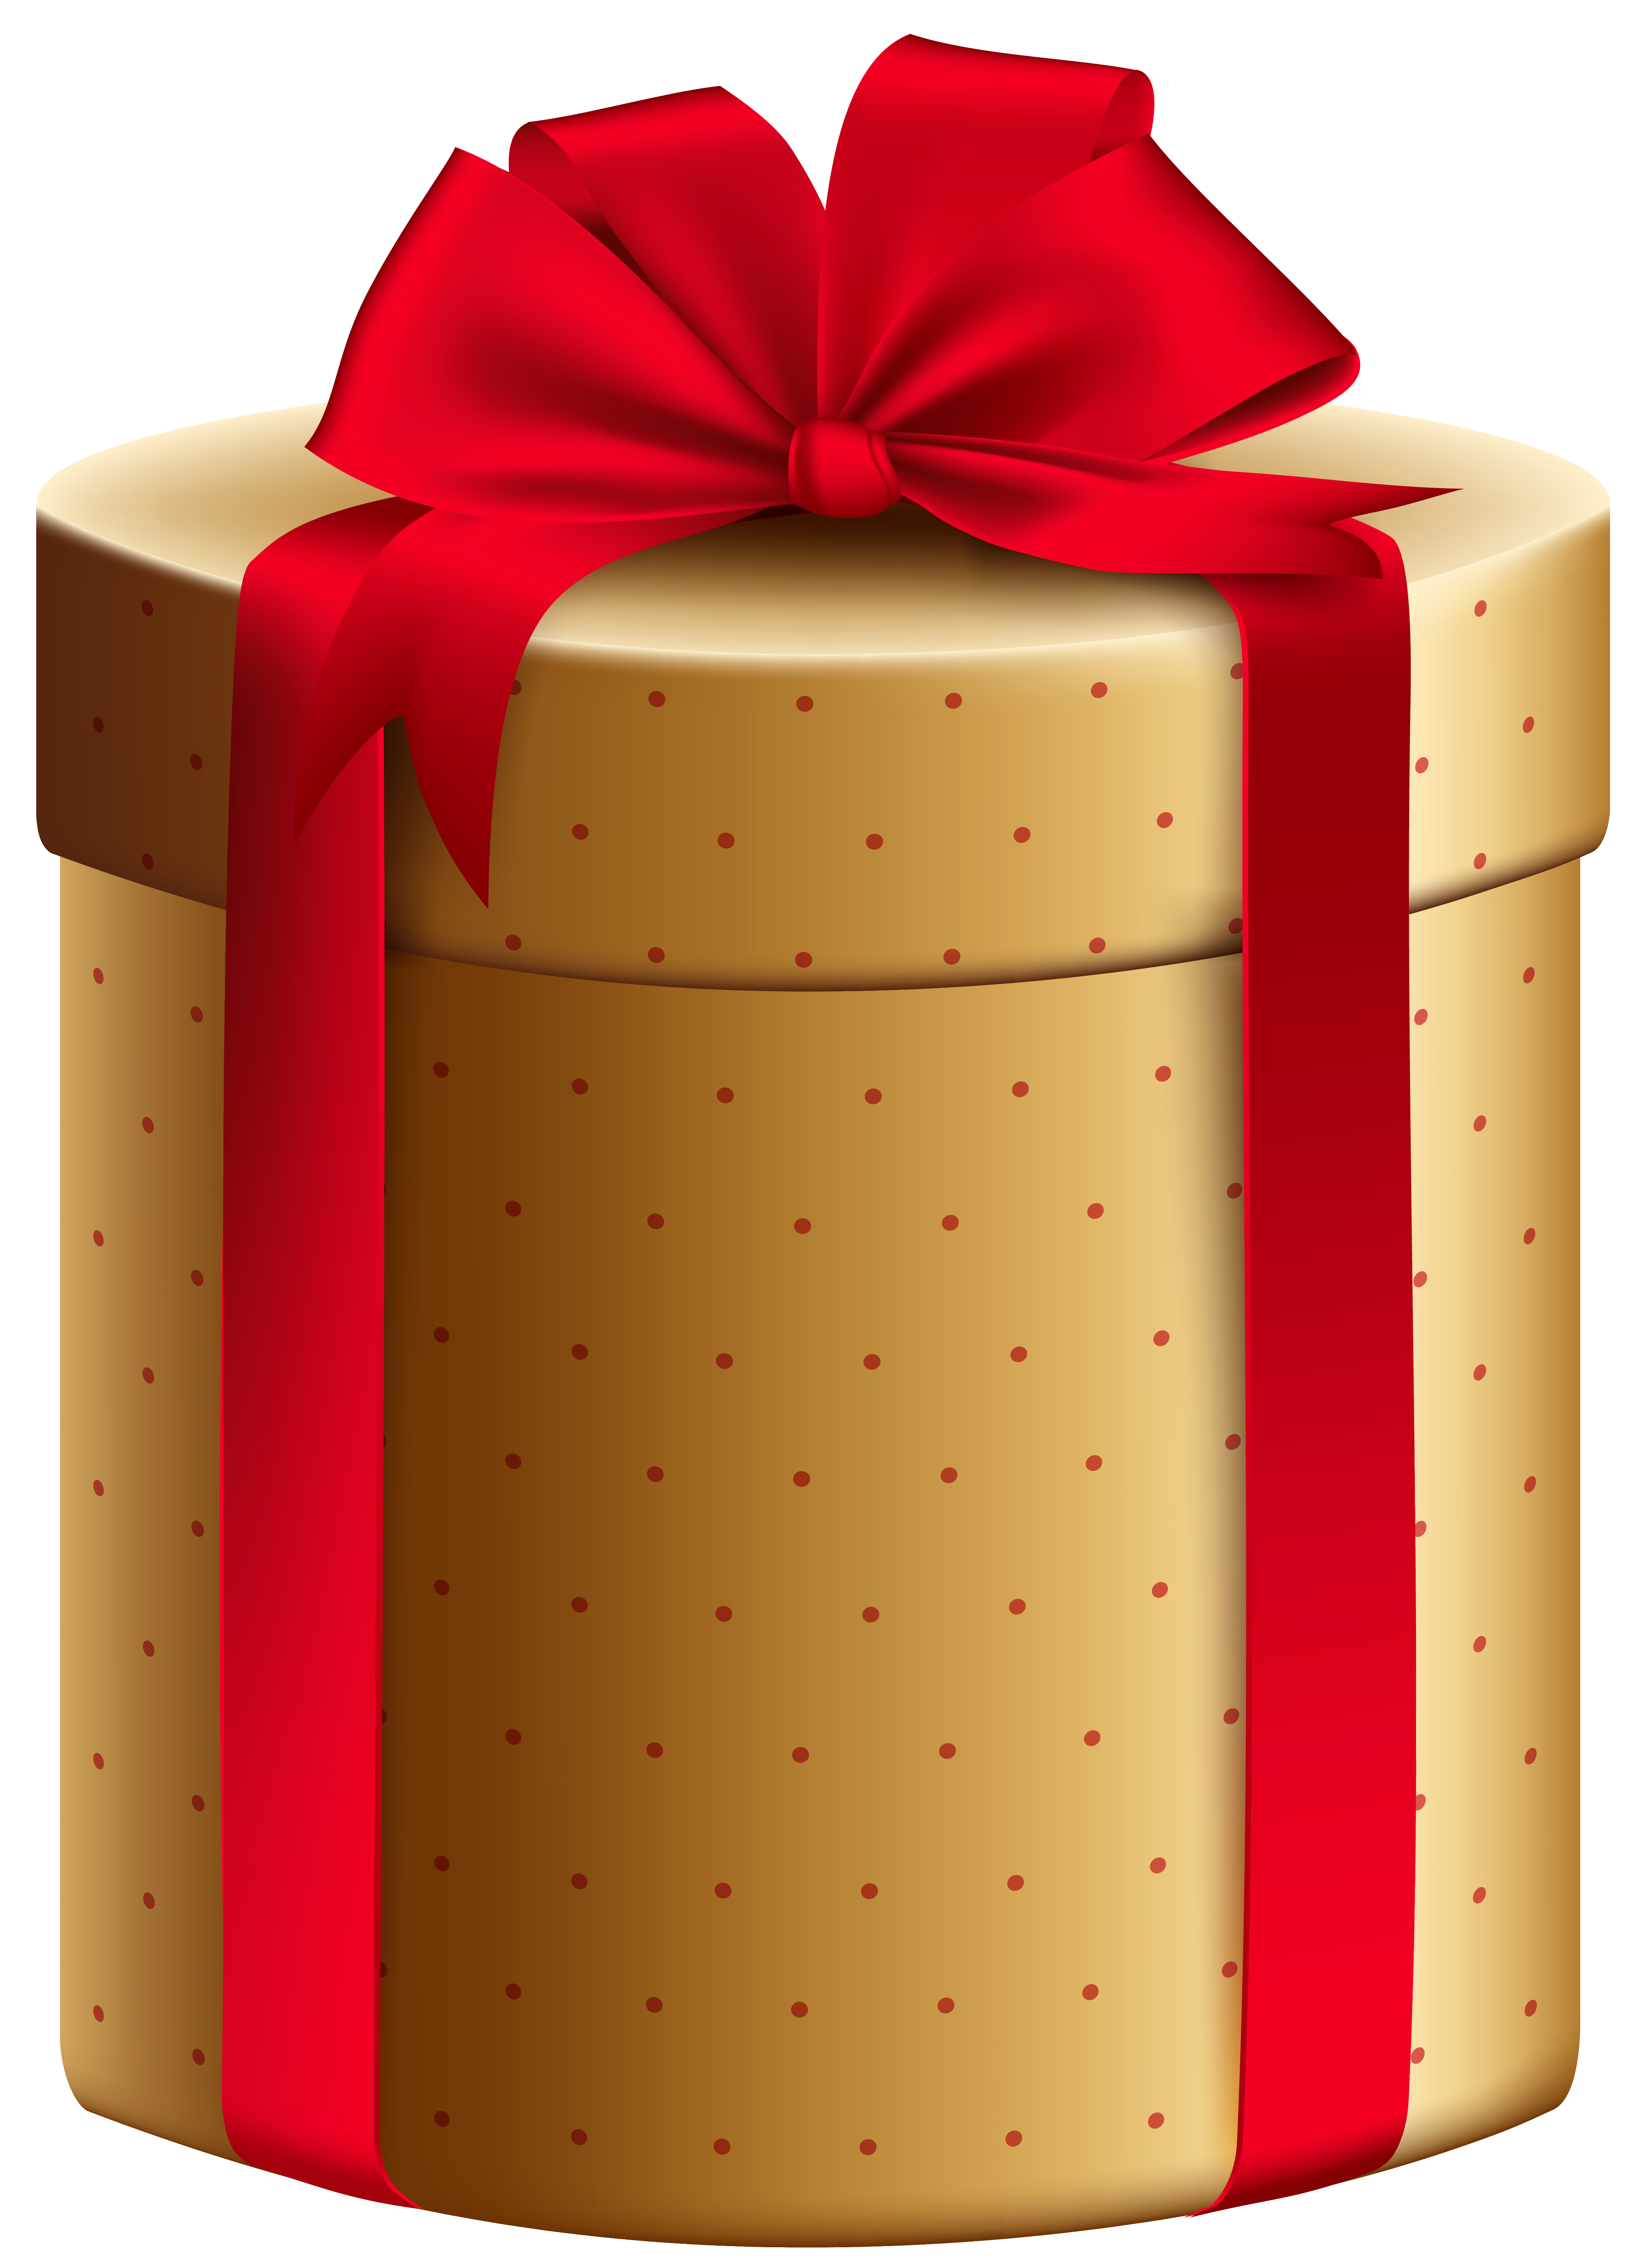 Gift clipart hat box. Gold red png image